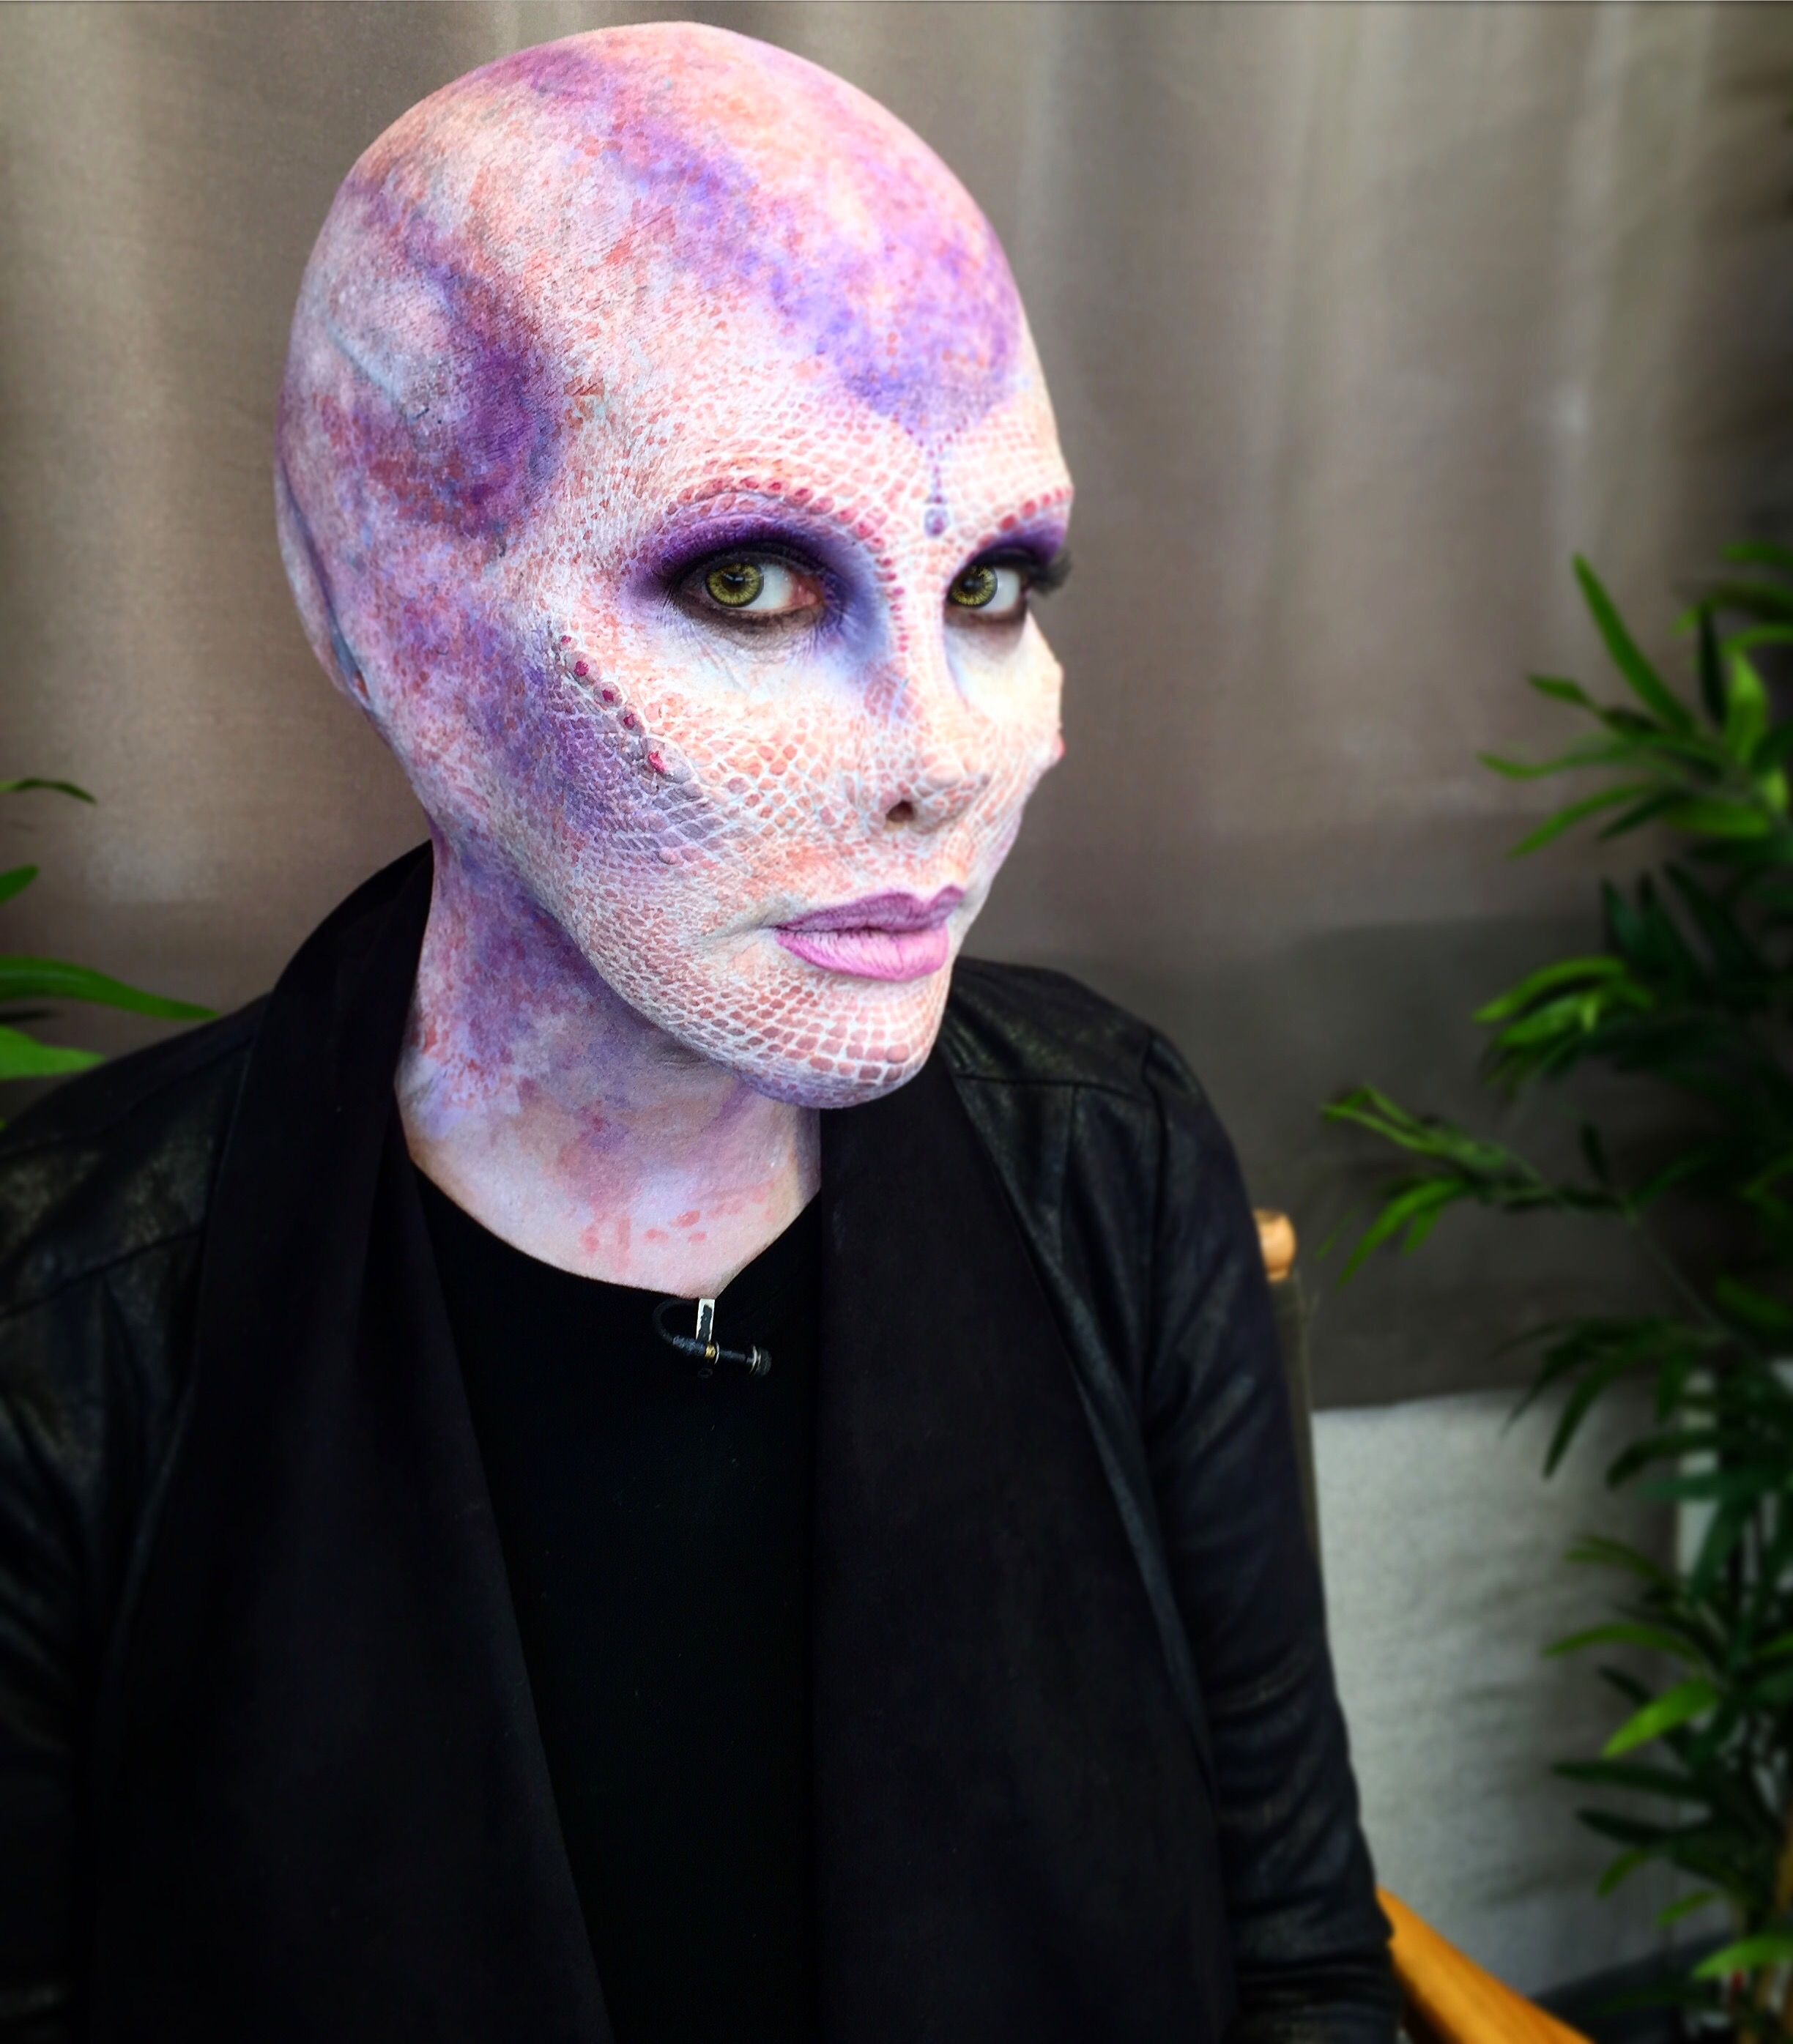  Alien makeup on Kym Douglas for Home and Family.   Makeup Artists: Hannah Reed and Shelby Patton 